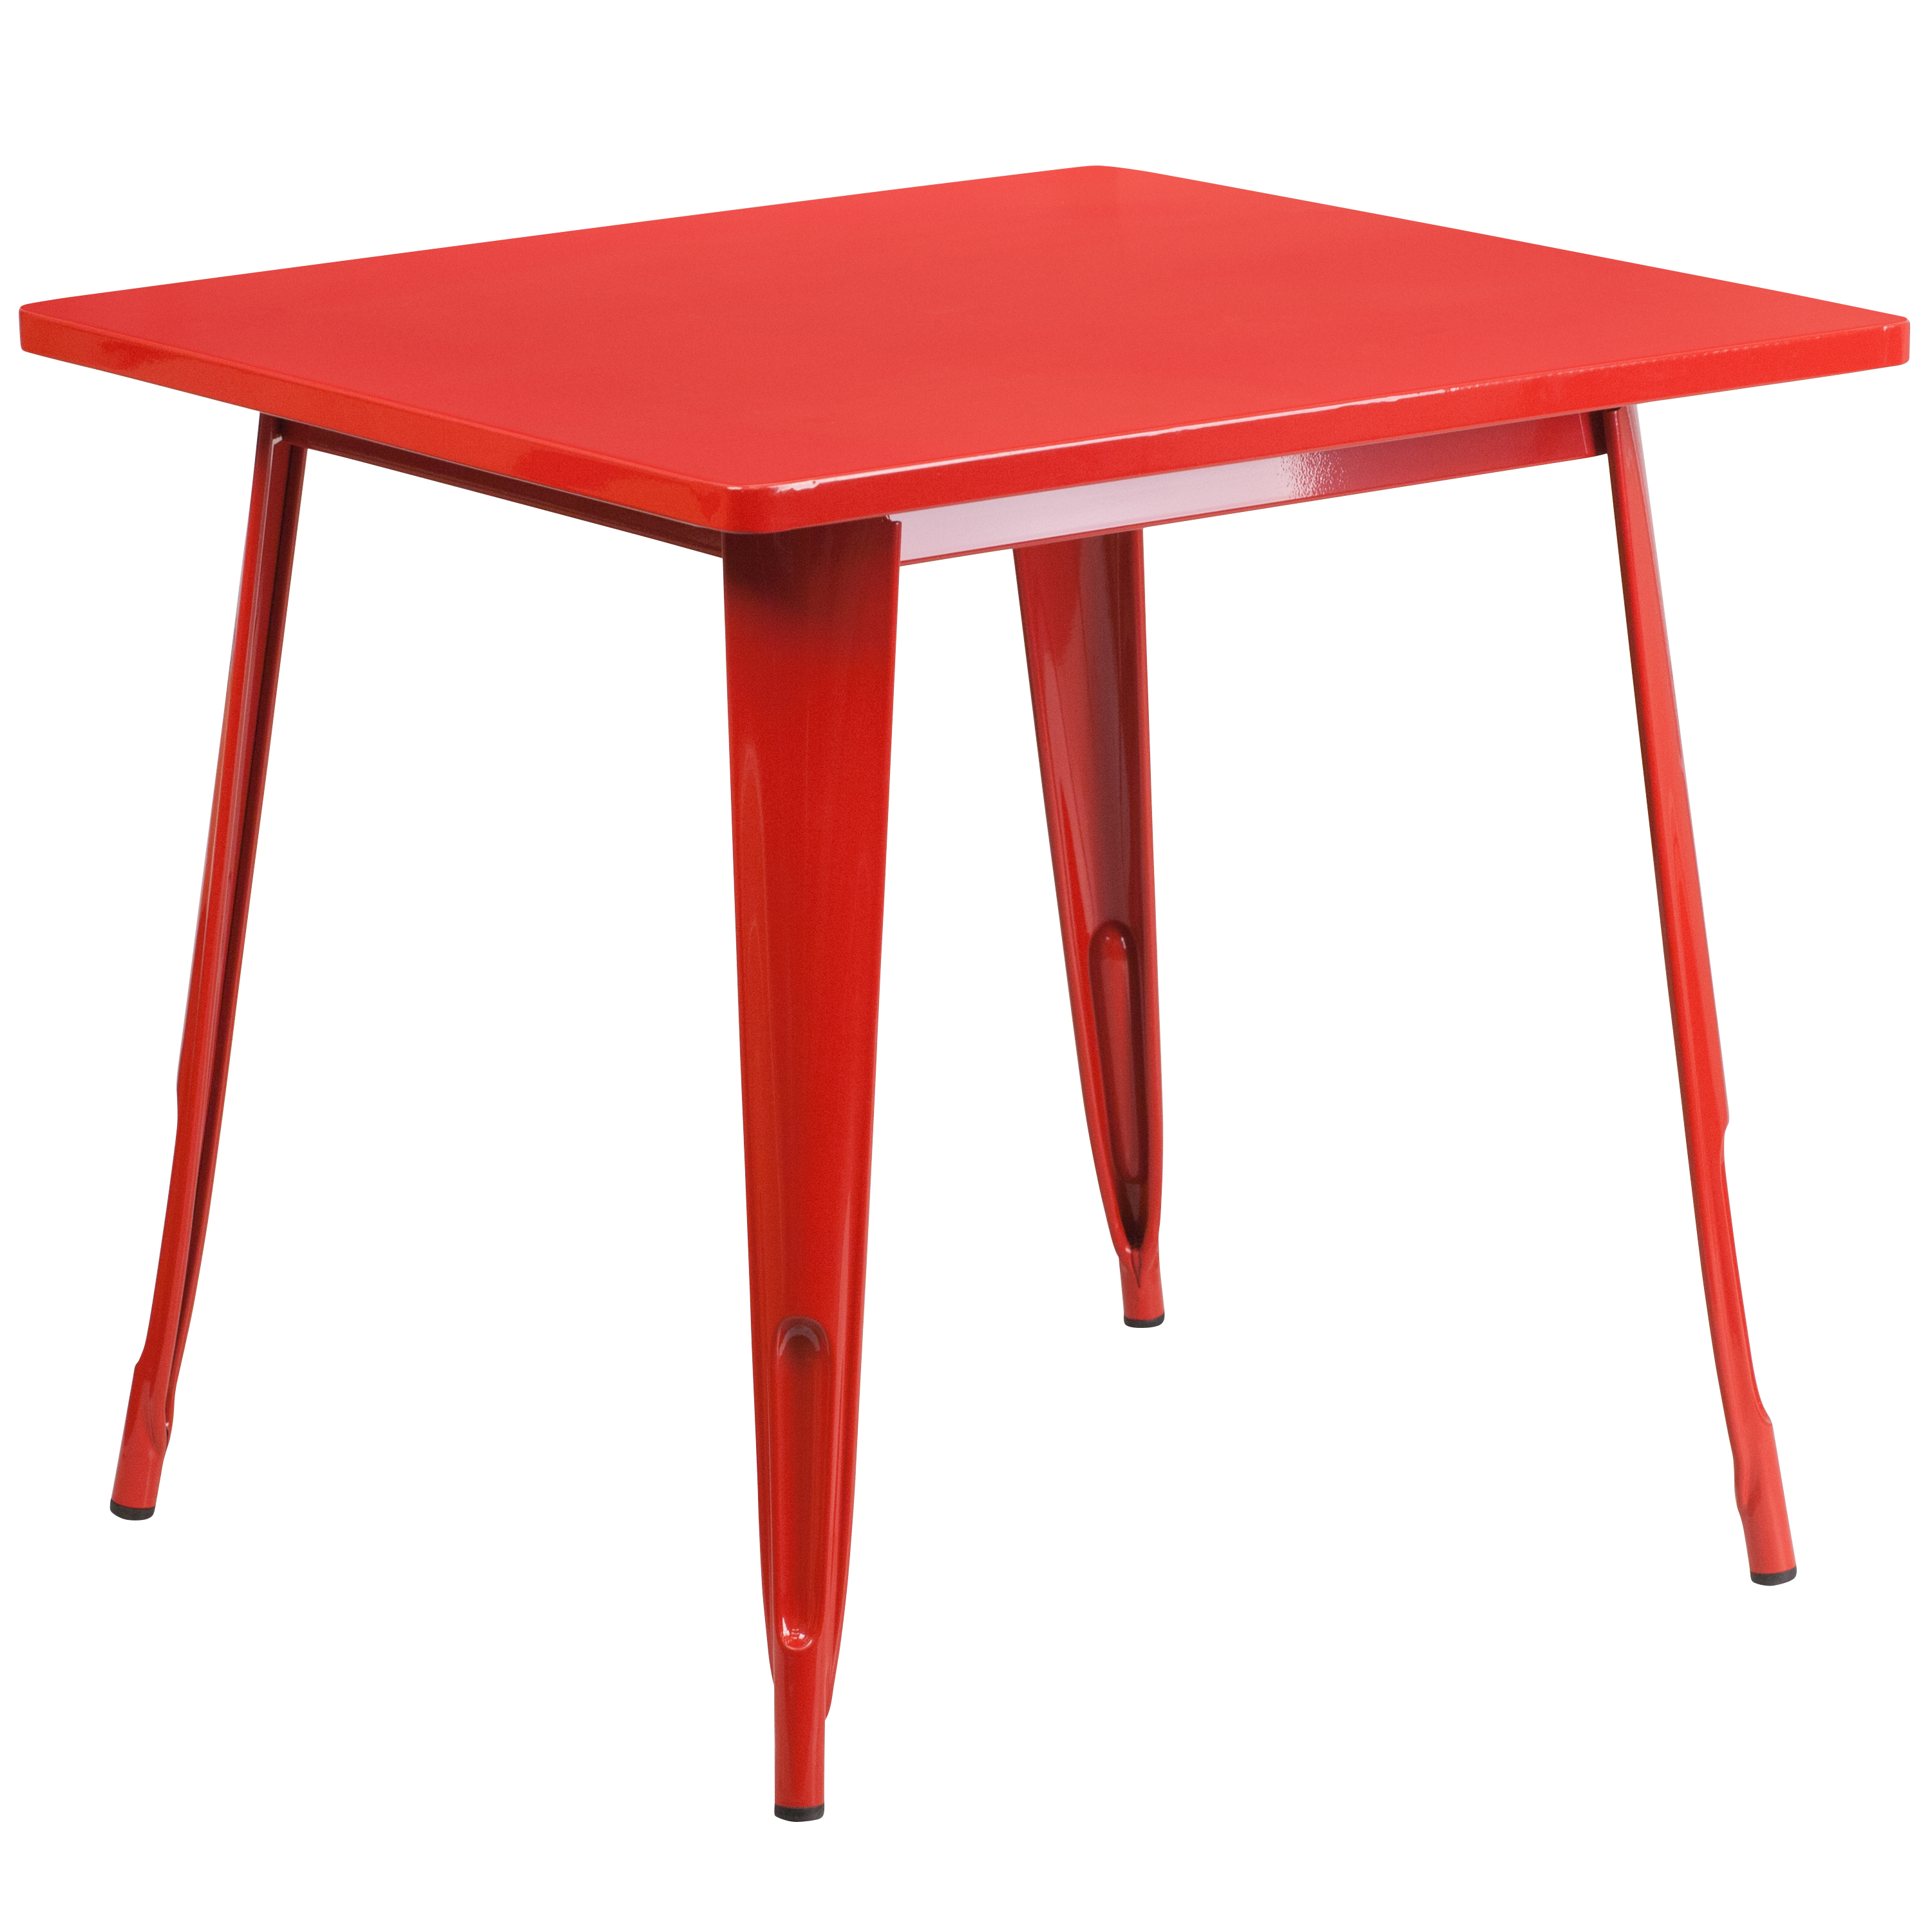 Flash Furniture Grady Commercial Grade 31.5" Square Red Metal Indoor-Outdoor Table Set with 4 Arm Chairs - image 4 of 5